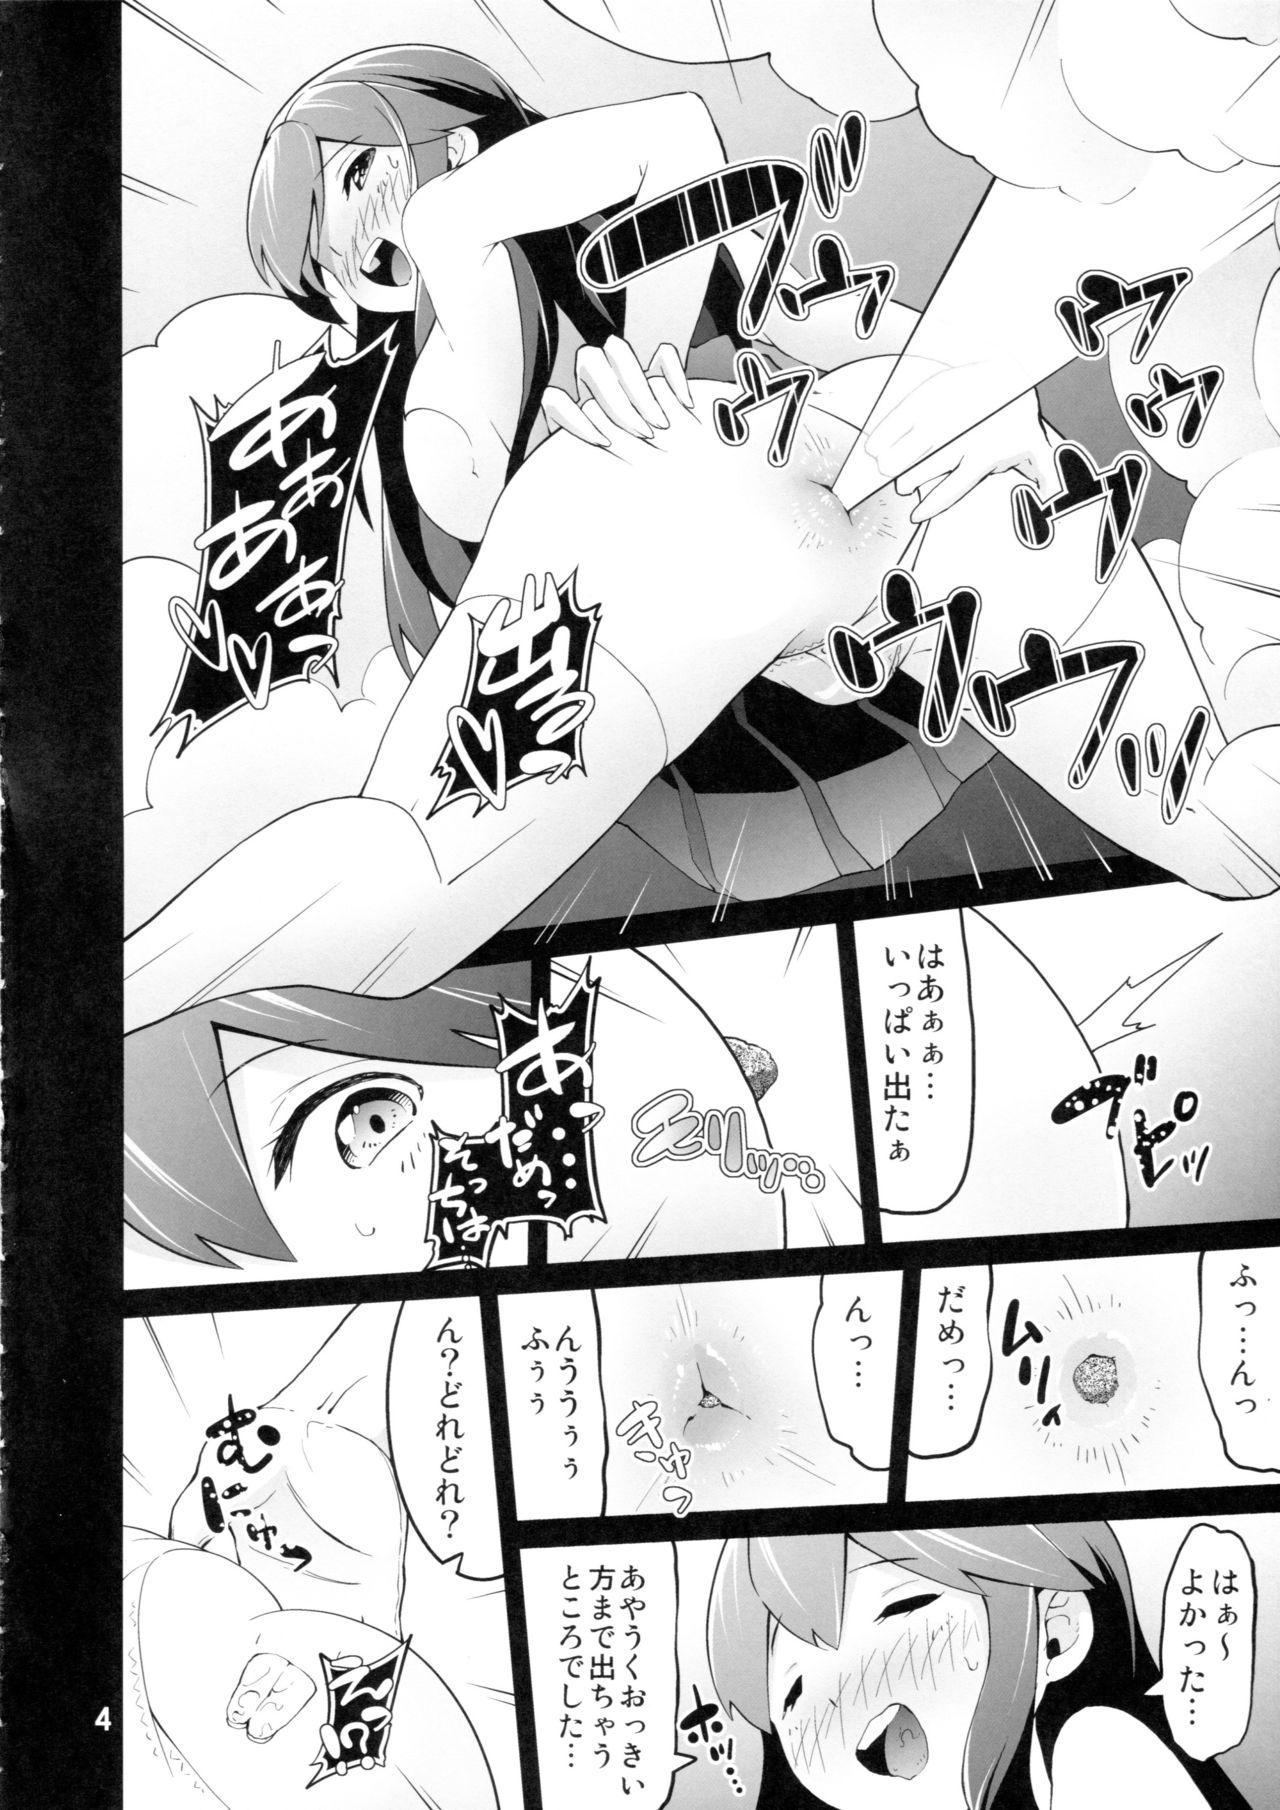 Sapphicerotica ICE WORK 7 - Kantai collection Negro - Page 3